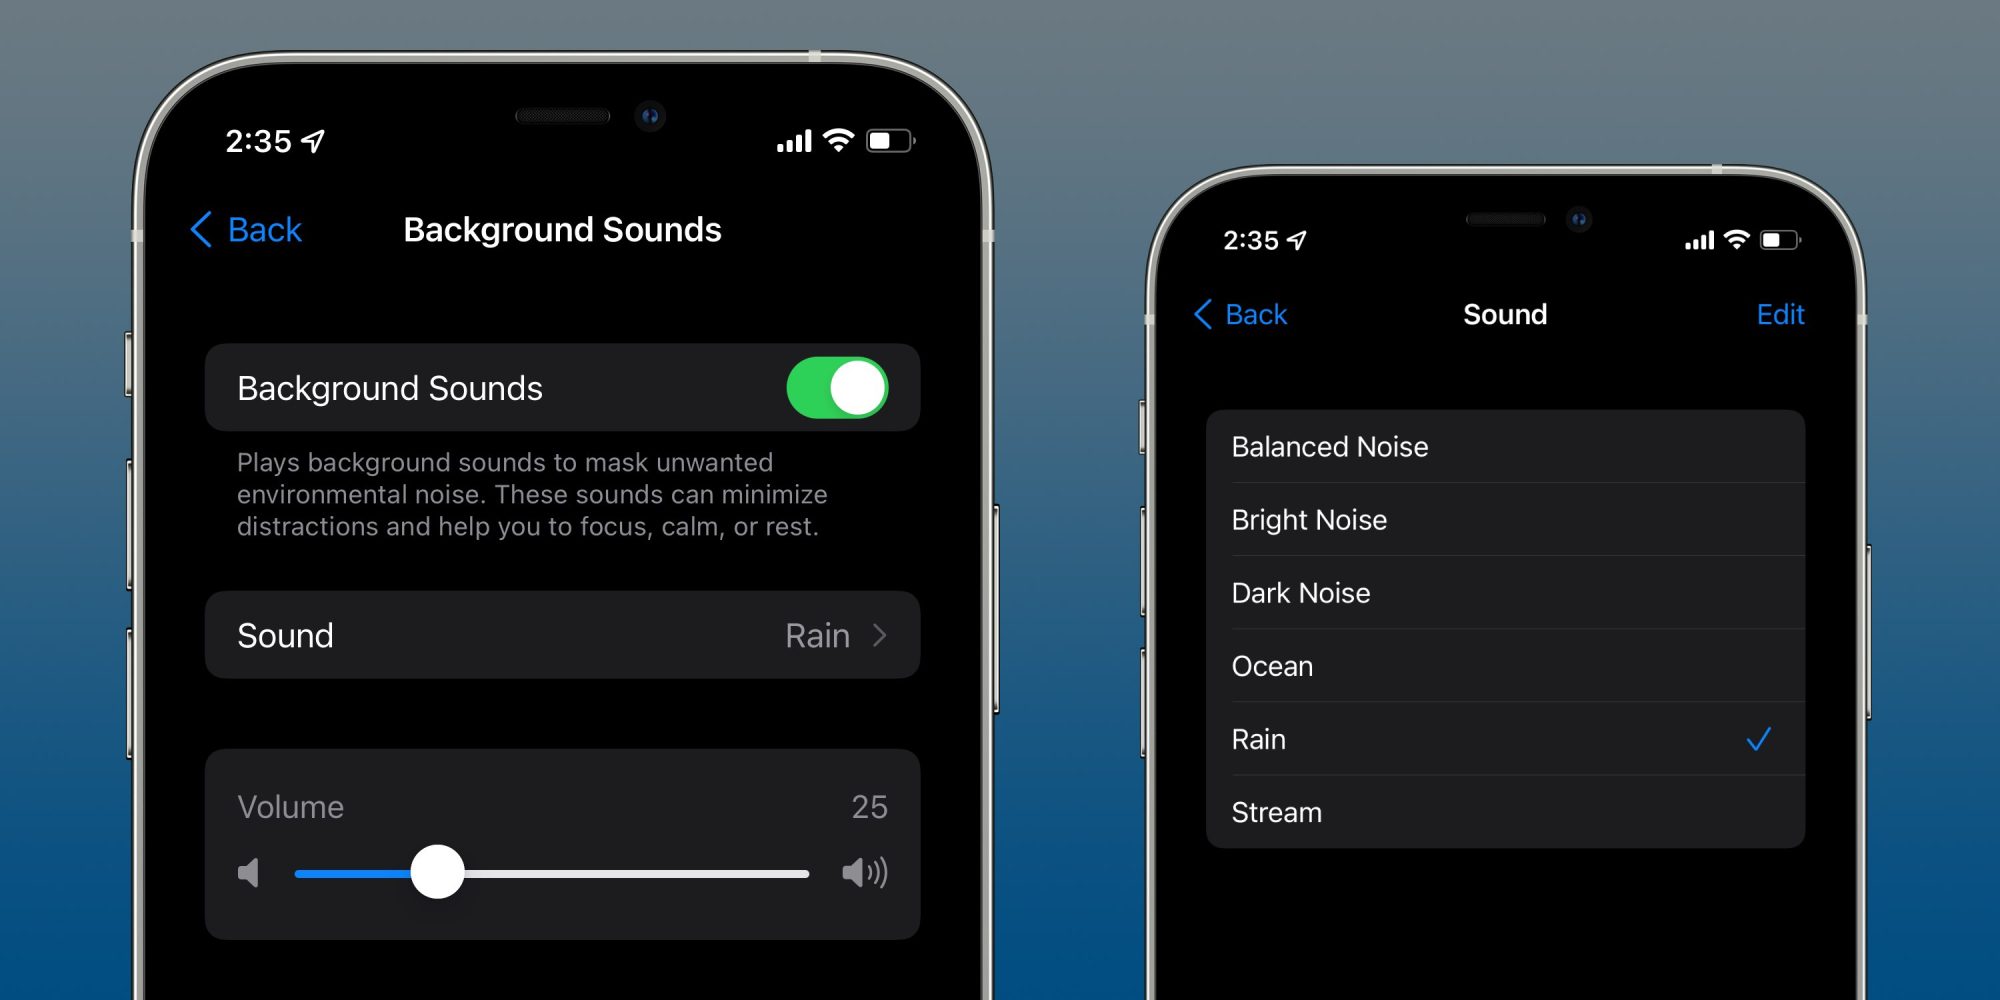 Background Sounds menu in iPhone's Settings